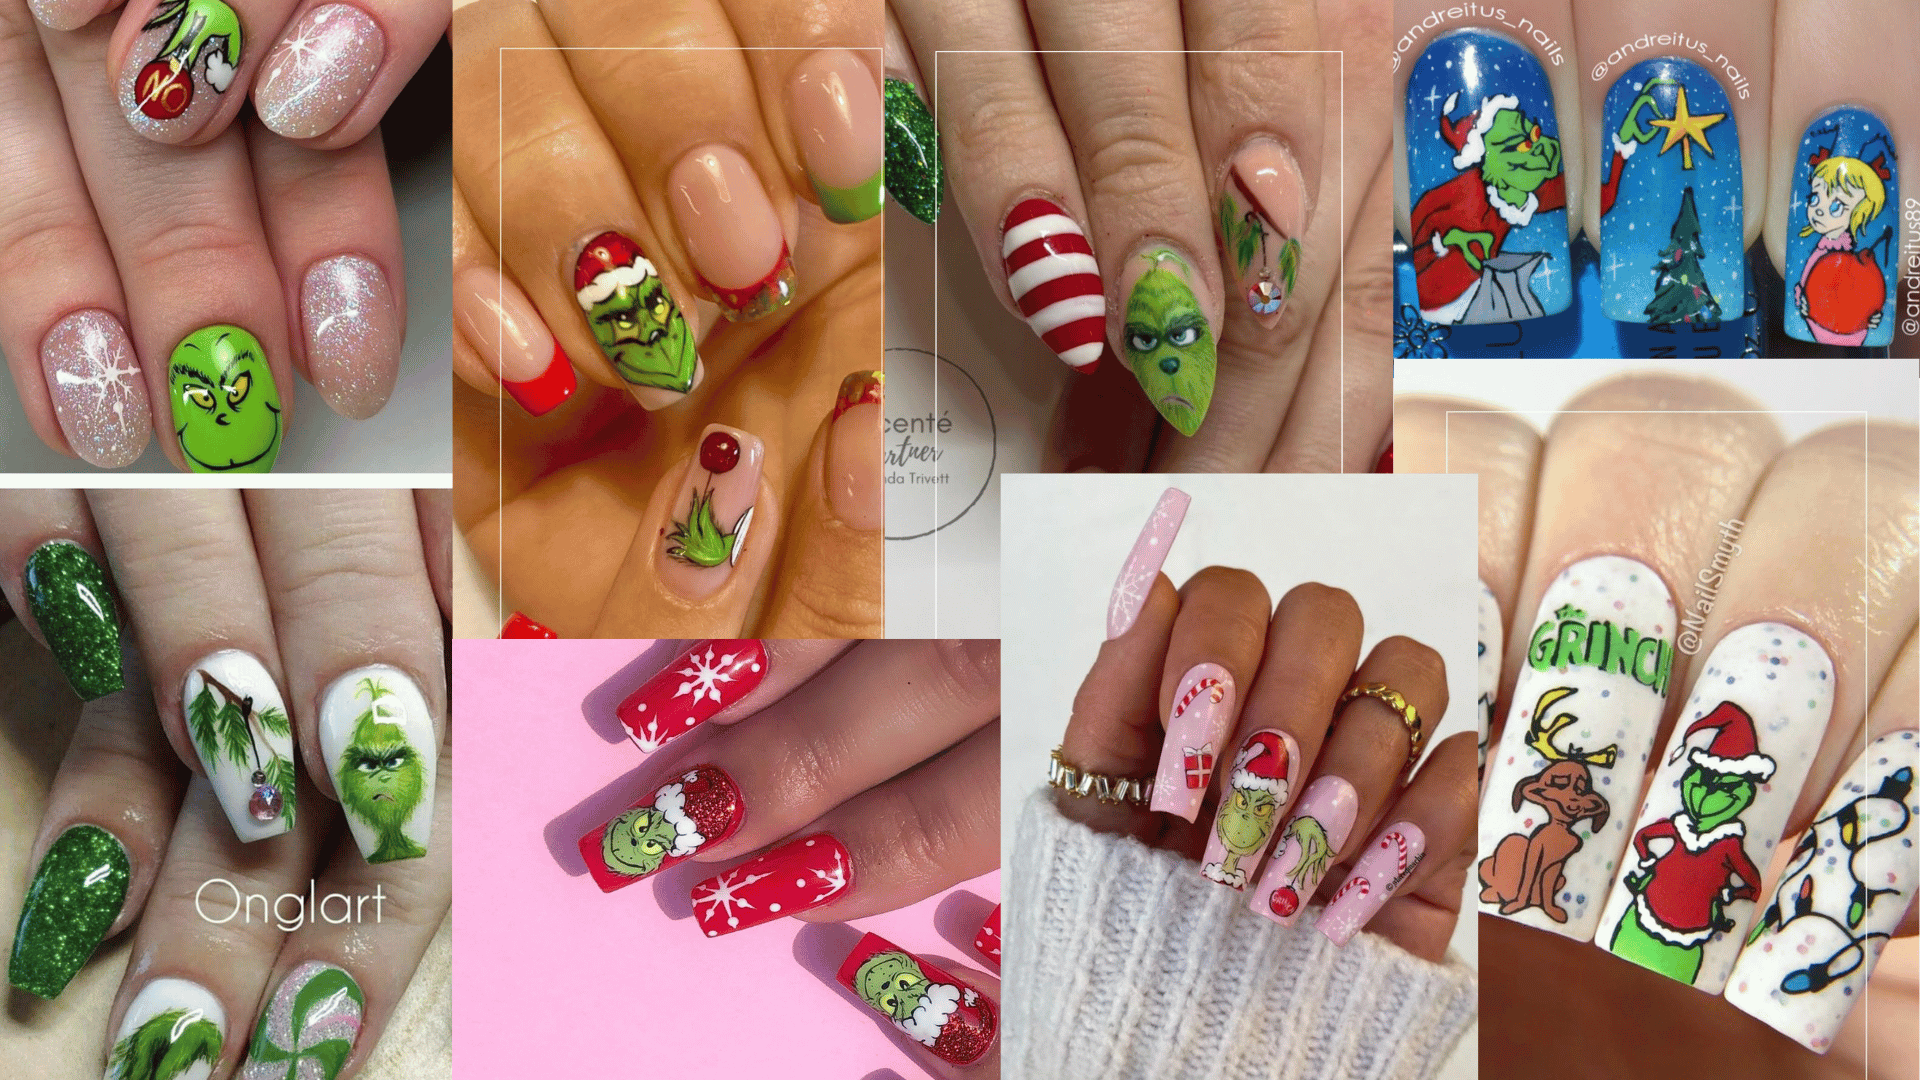 🎅+84 Grinch💚 Nail Designs Playful and Whimsical Nails for the Holiday Season🎄💅